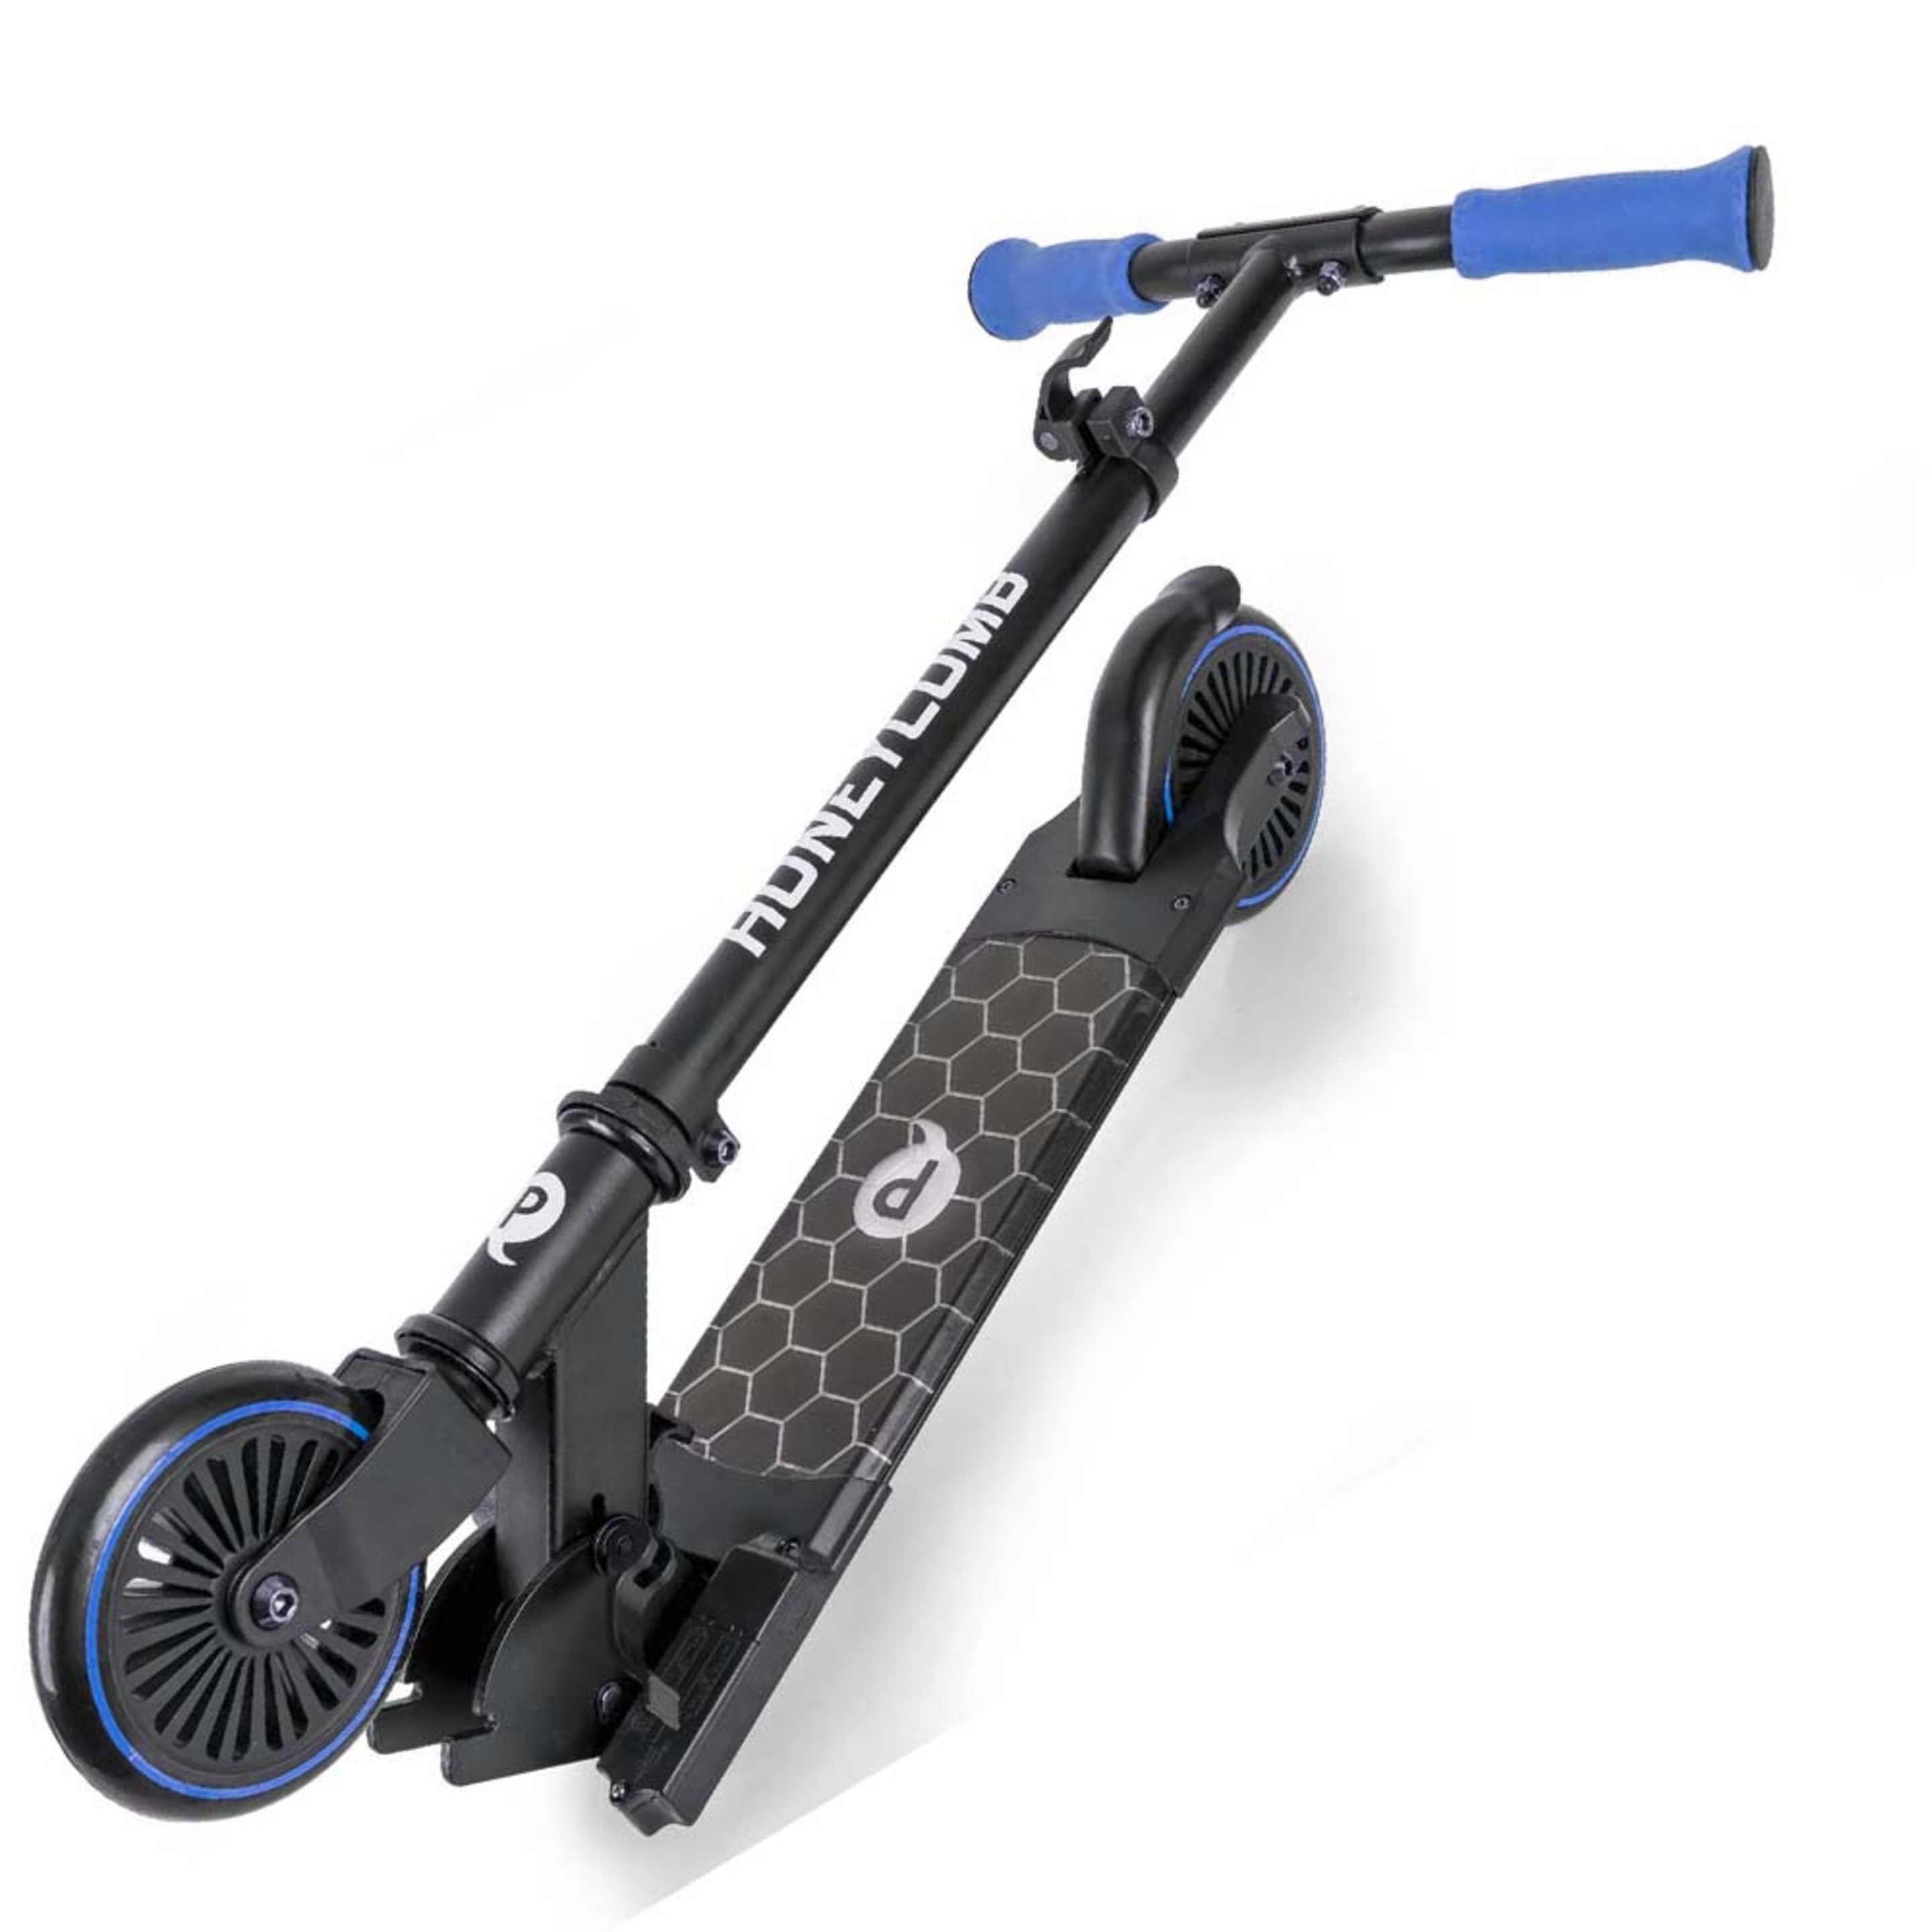 Patinete Qplay Honey Comb Scooter Con Luces Led - Azul  MKP